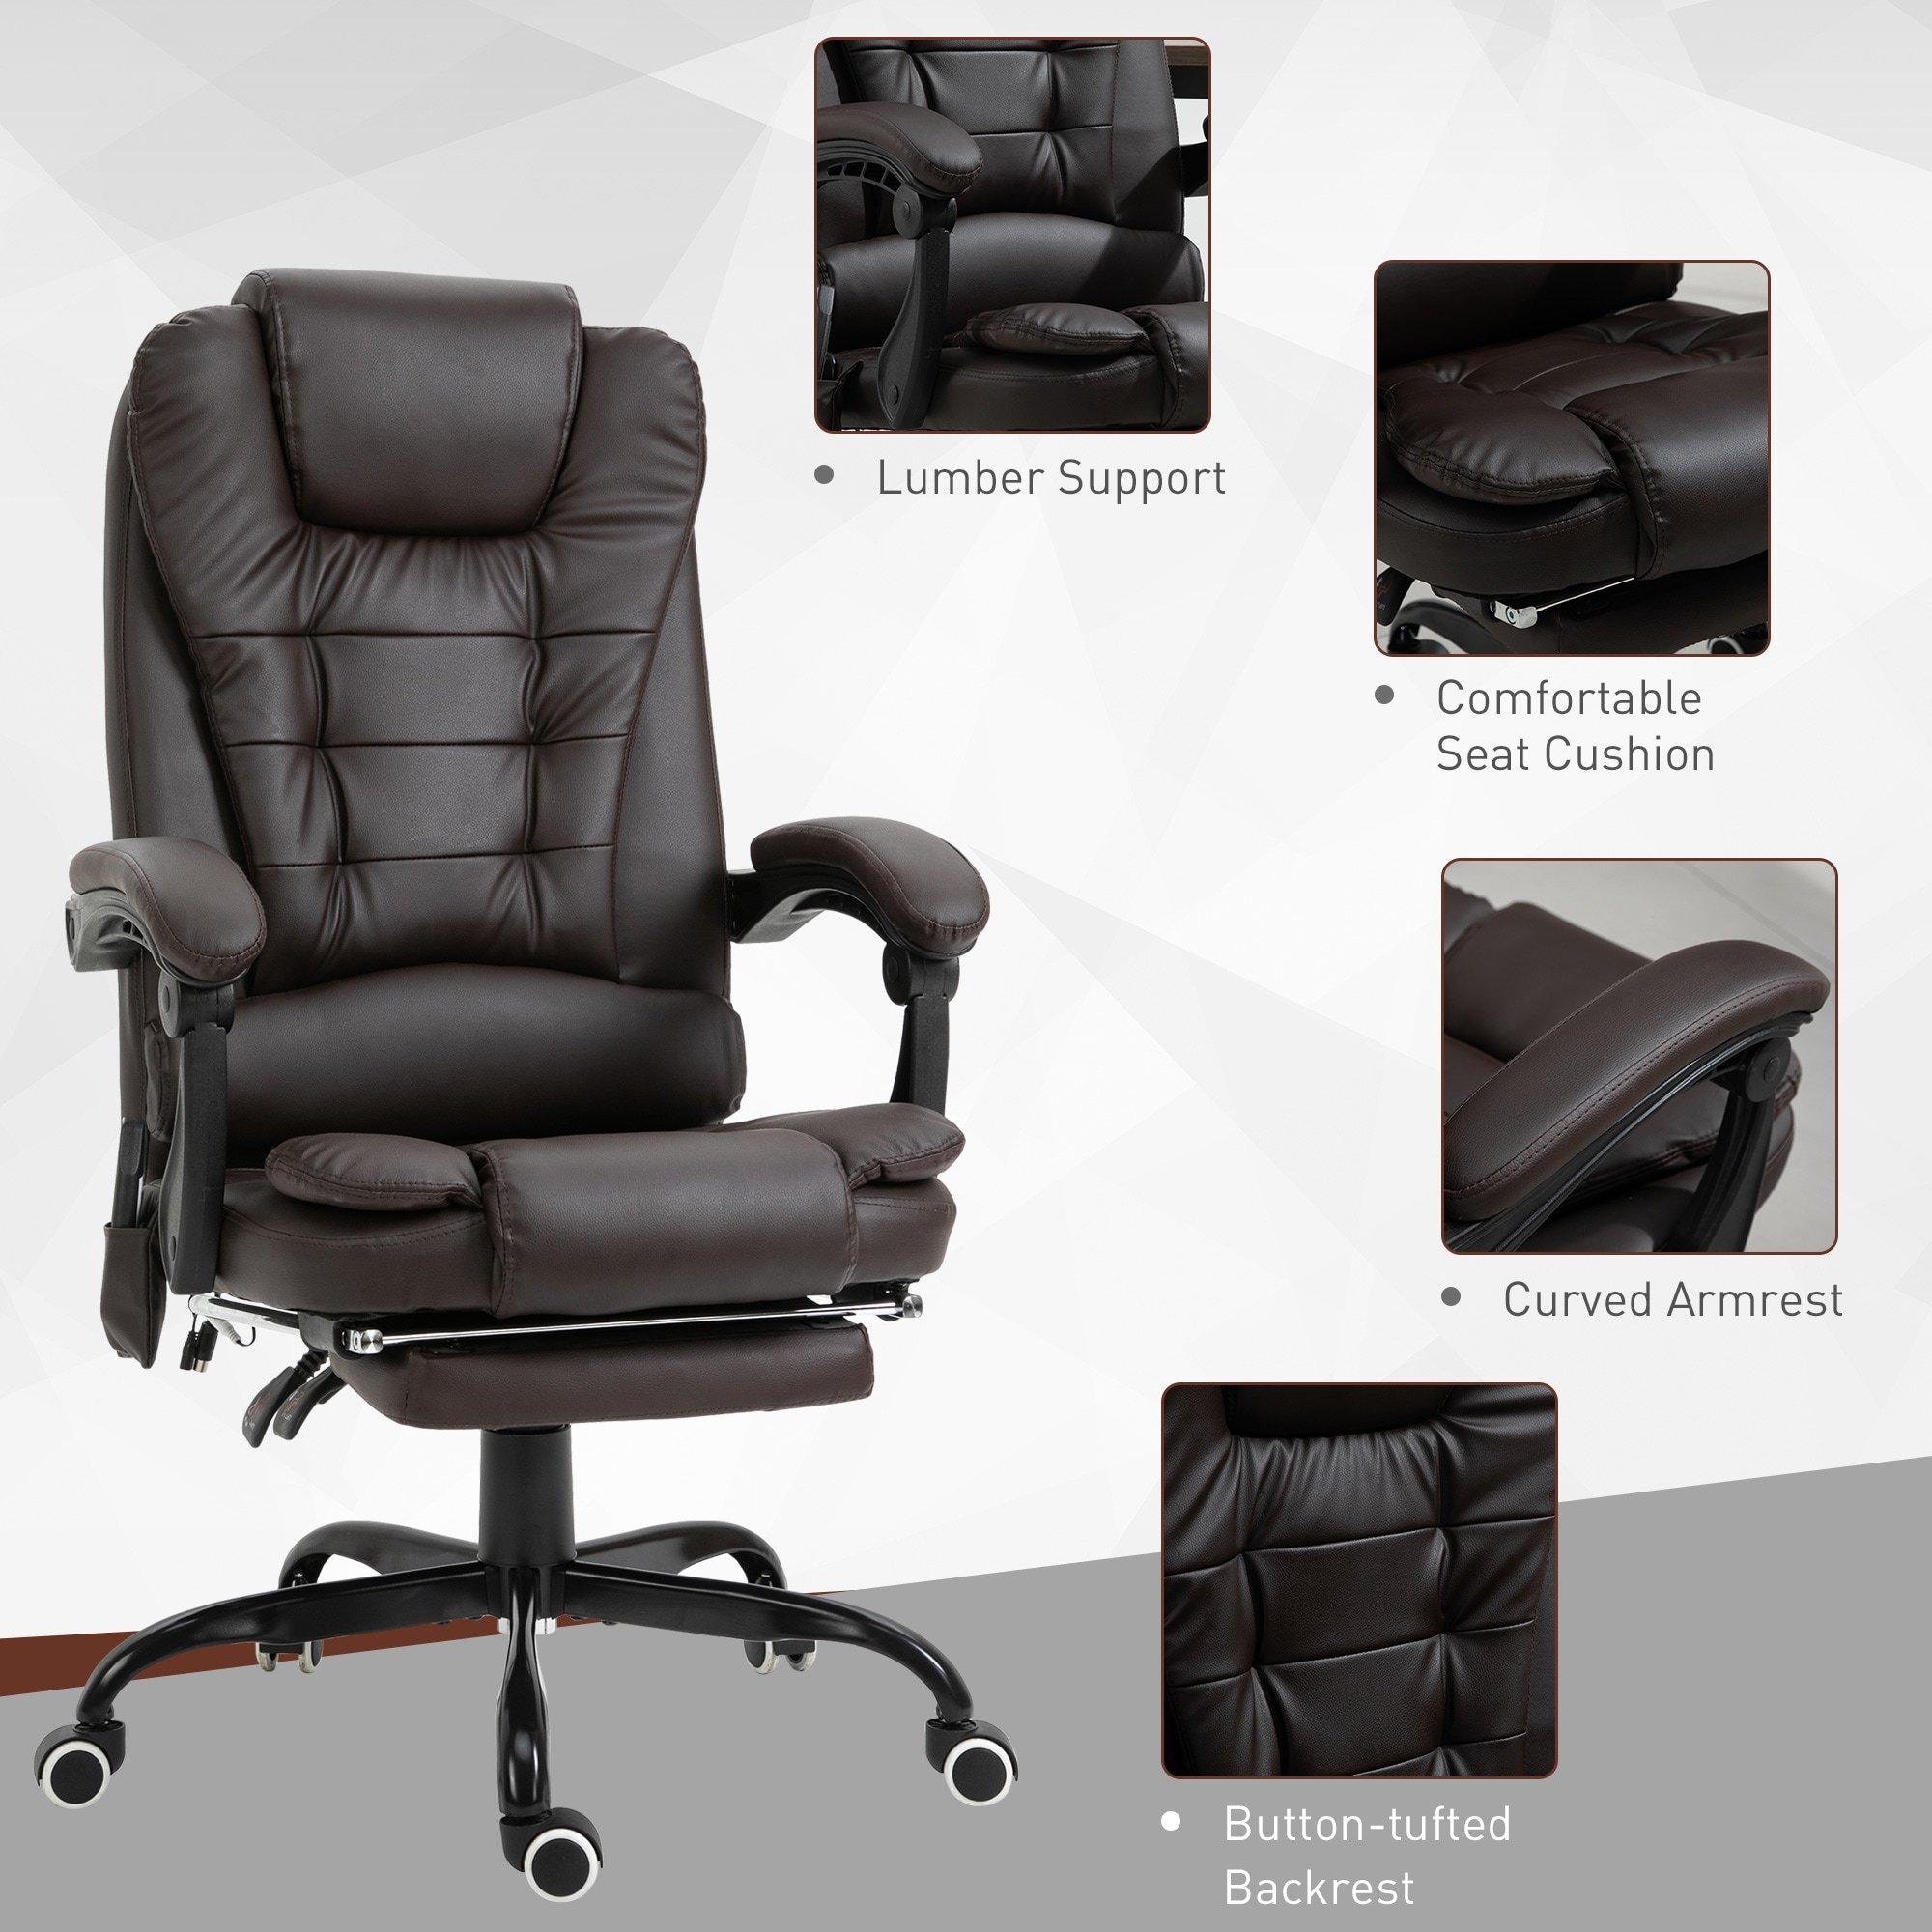 https://ak1.ostkcdn.com/images/products/is/images/direct/faea22af6d60b9893b34fbd186ff0ffe3e693138/Vinsetto-7-Point-Vibrating-Massage-Office-Chair-High-Back-Executive-Recliner-with-Lumbar-Support%2C-Footrest%2C-Reclining-Back.jpg